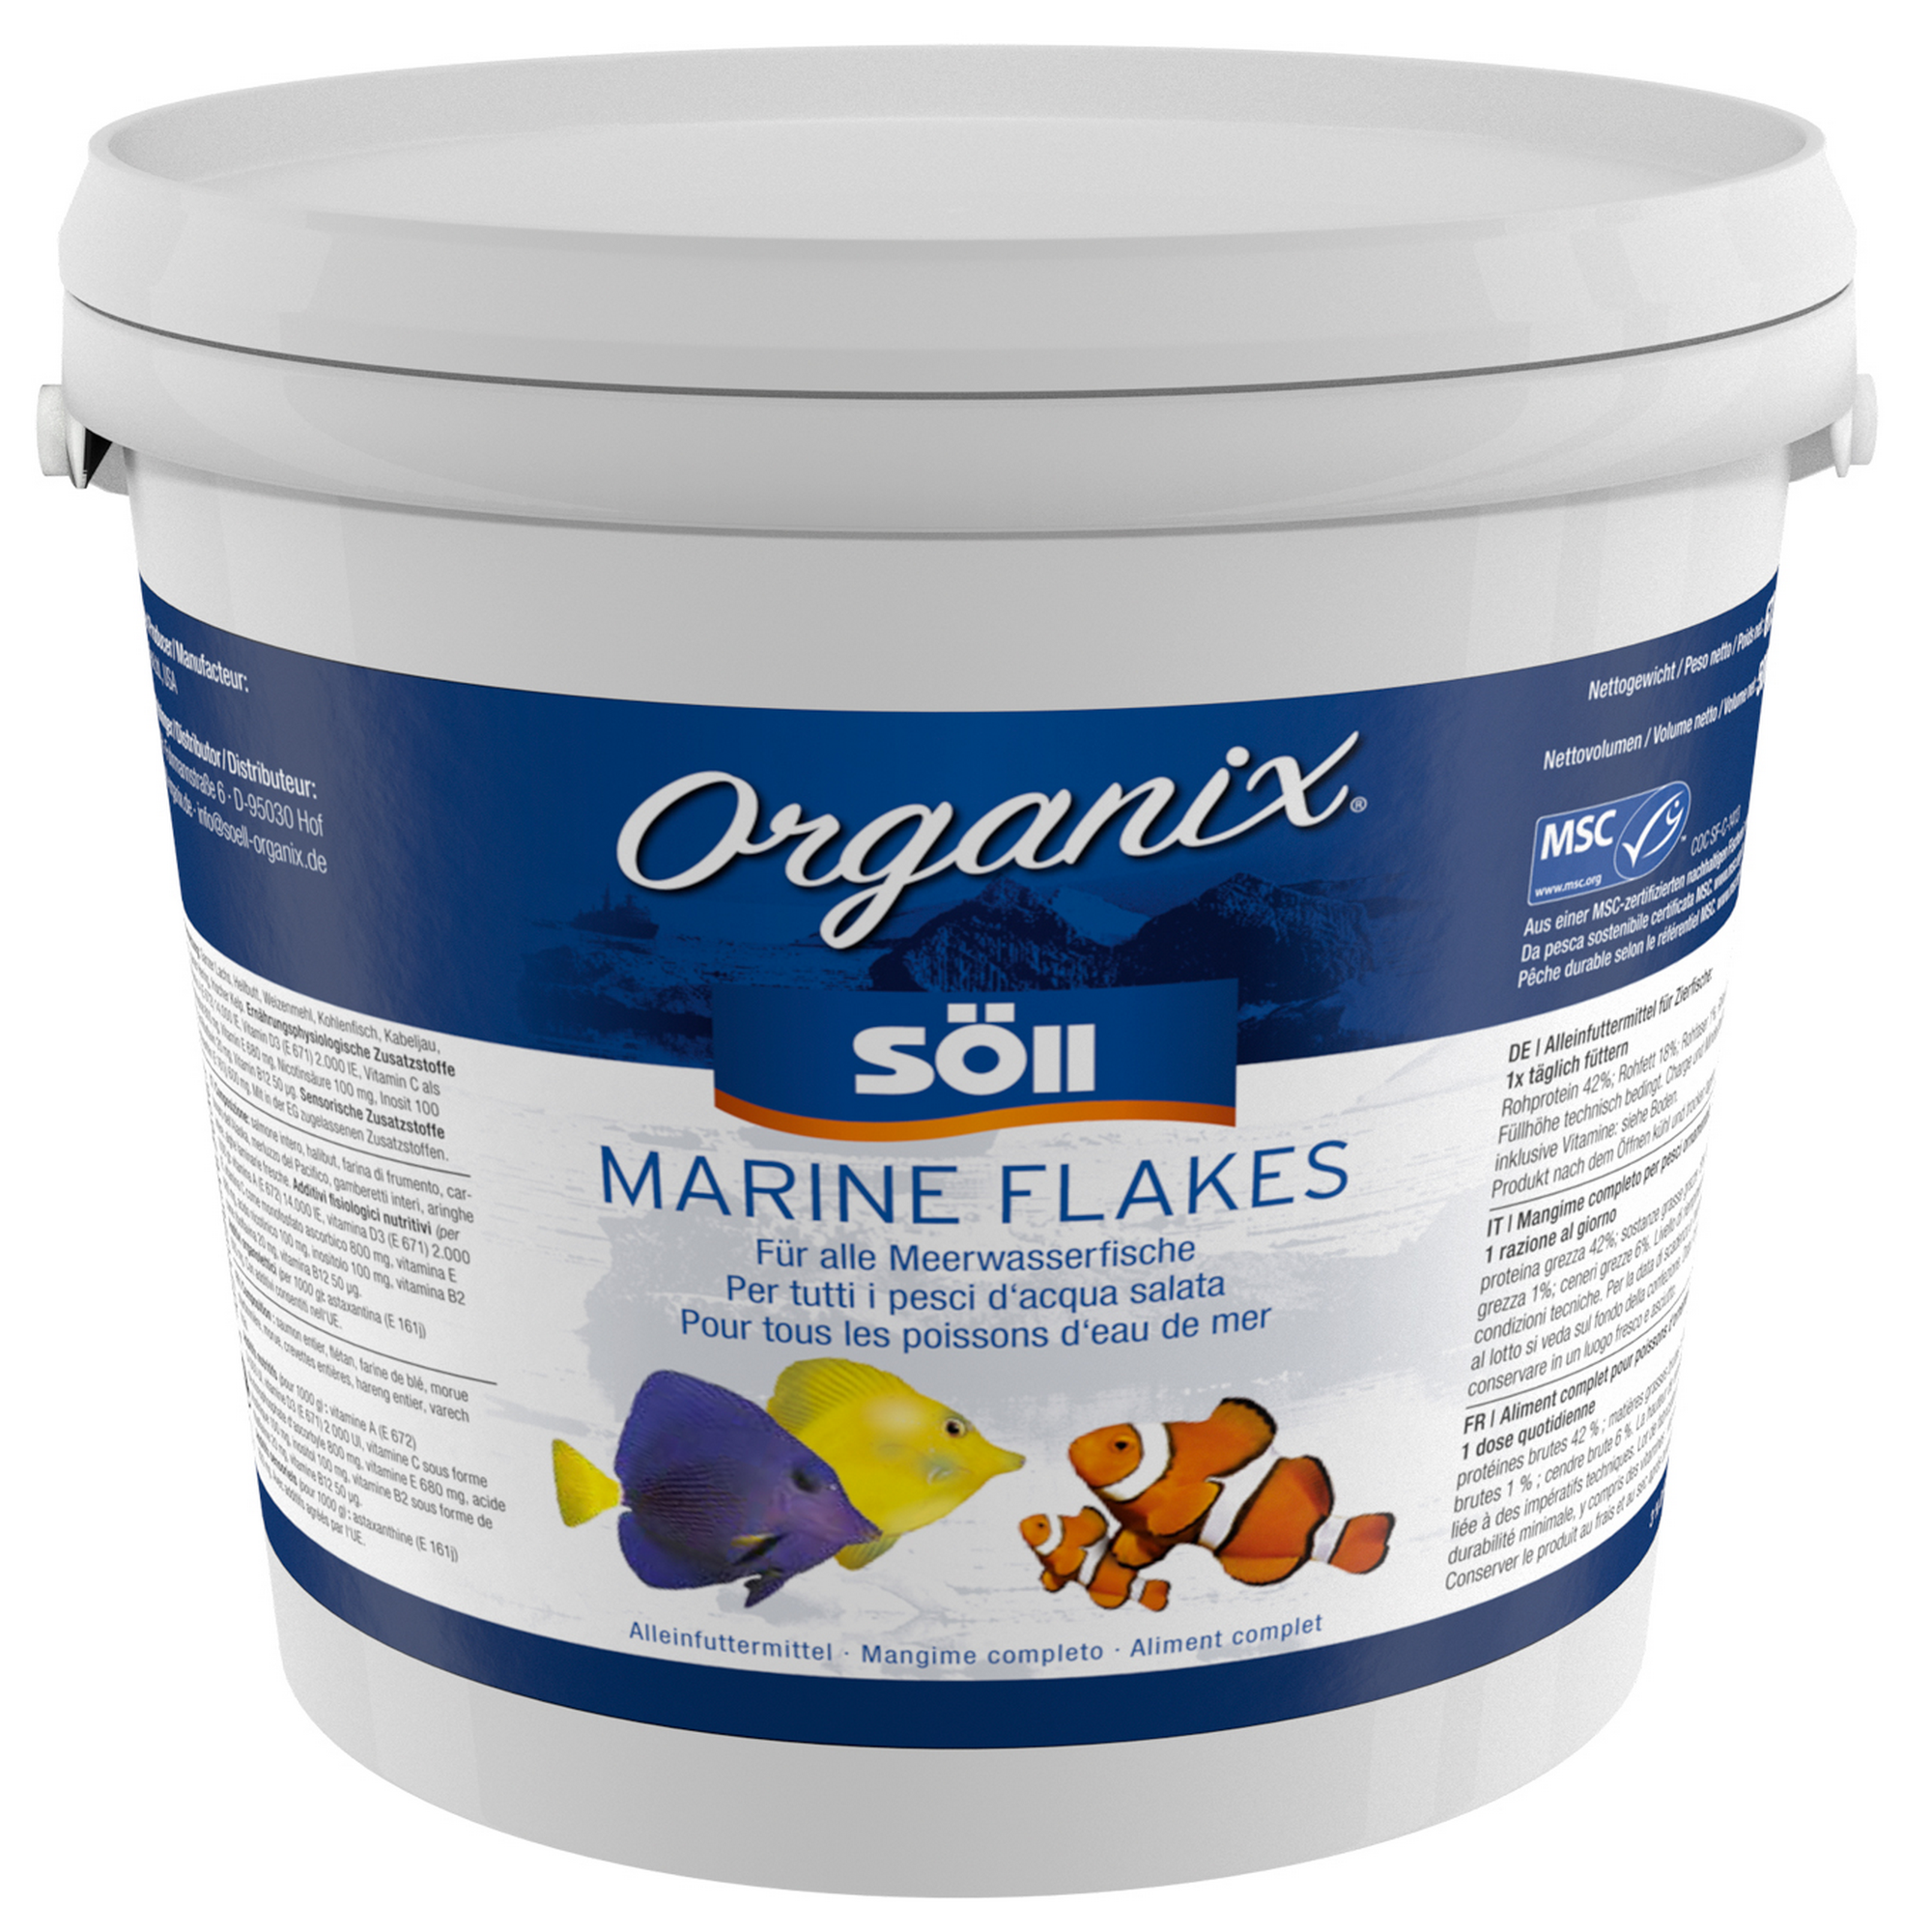 Organix Marine Flakes 5 l + product picture